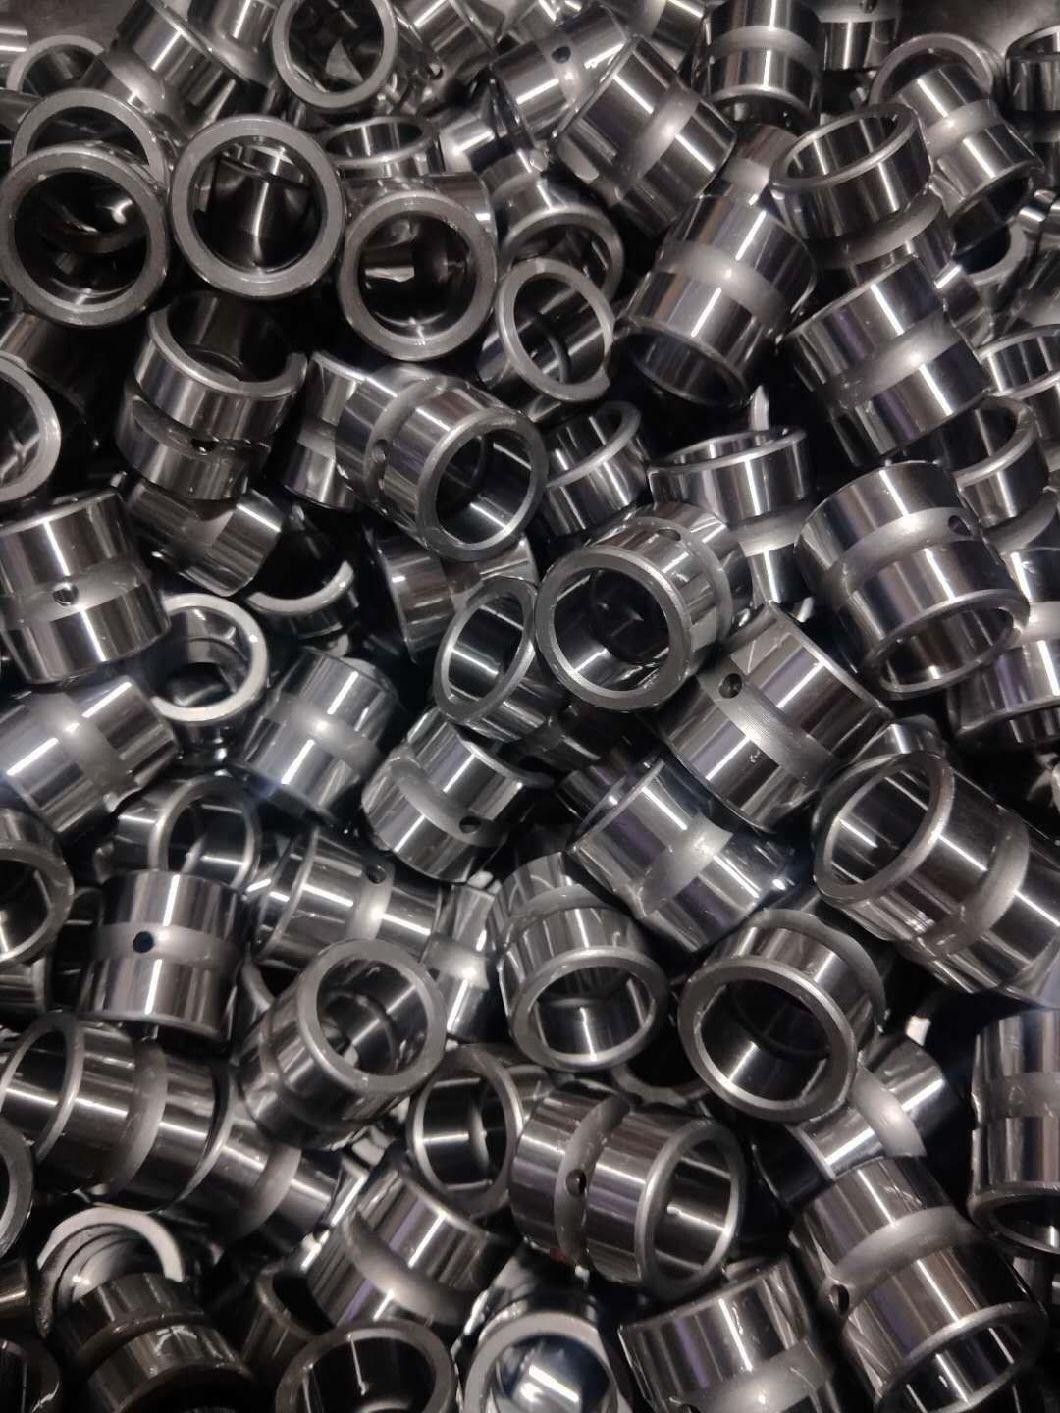 China Supplier High Precision Stainless Steel Bushing Cross Oil Groove Steel Bearing